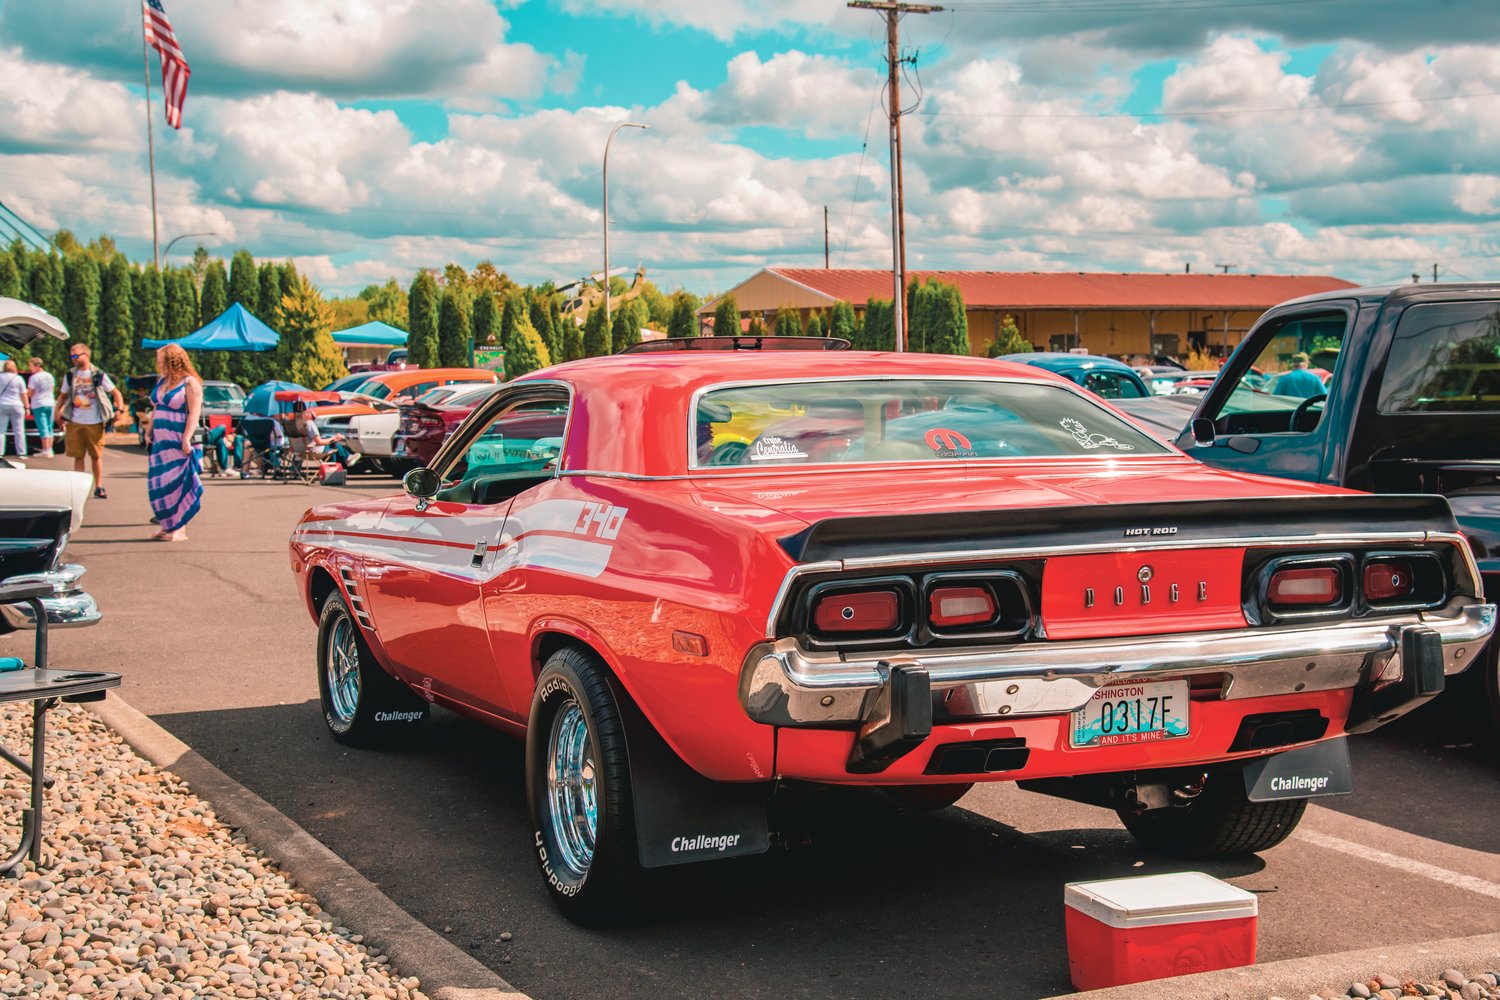 A "Cruise Centralia" sticker is displayed on the back window of a Dodge Challenger parked outside the Veterans Memorial Museum on Sunday for the Rust or Shine Car Show and Music Festival in Chehalis.